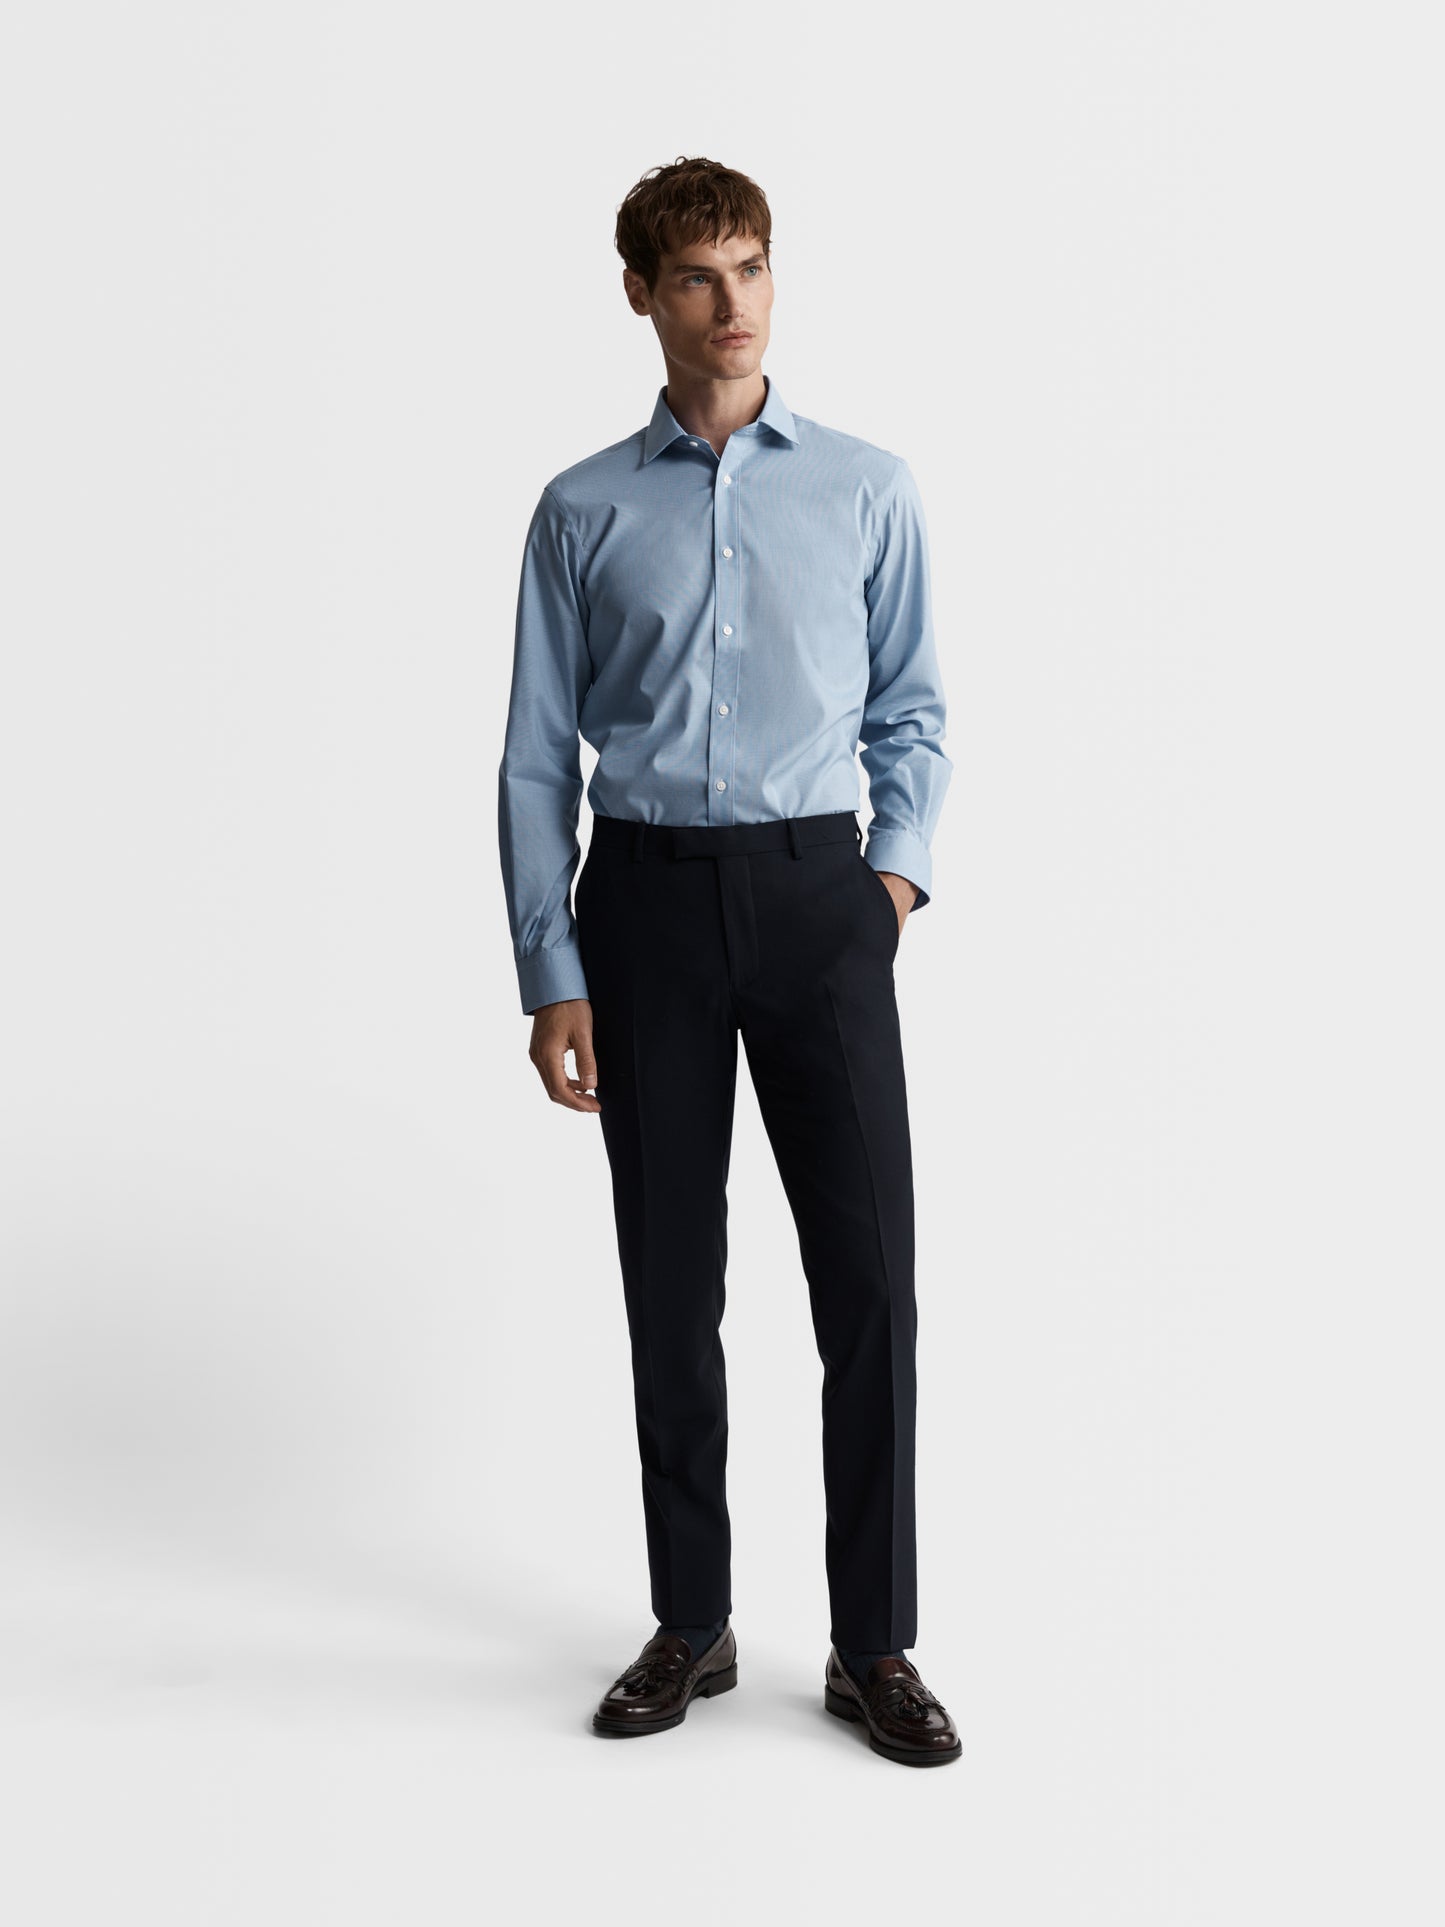 Image 4 of Max Performance Blue Puppytooth Plain Weave Slim Fit Single Cuff Classic Collar Shirt